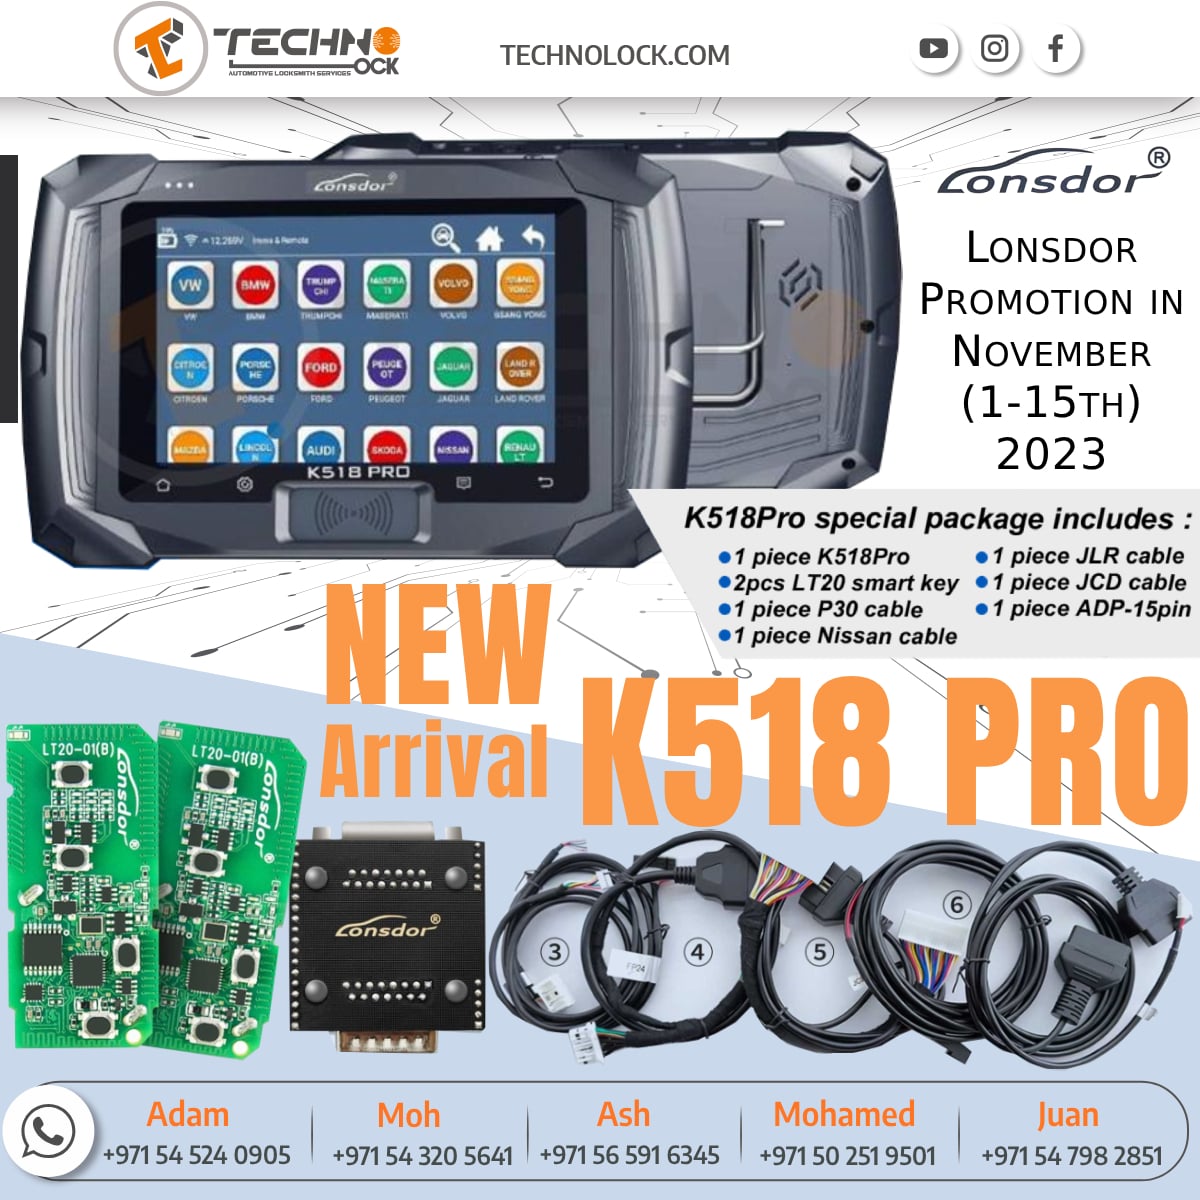  Lonsdor K518 PRO Key Programmer: The most advanced and powerful key programmer on the market